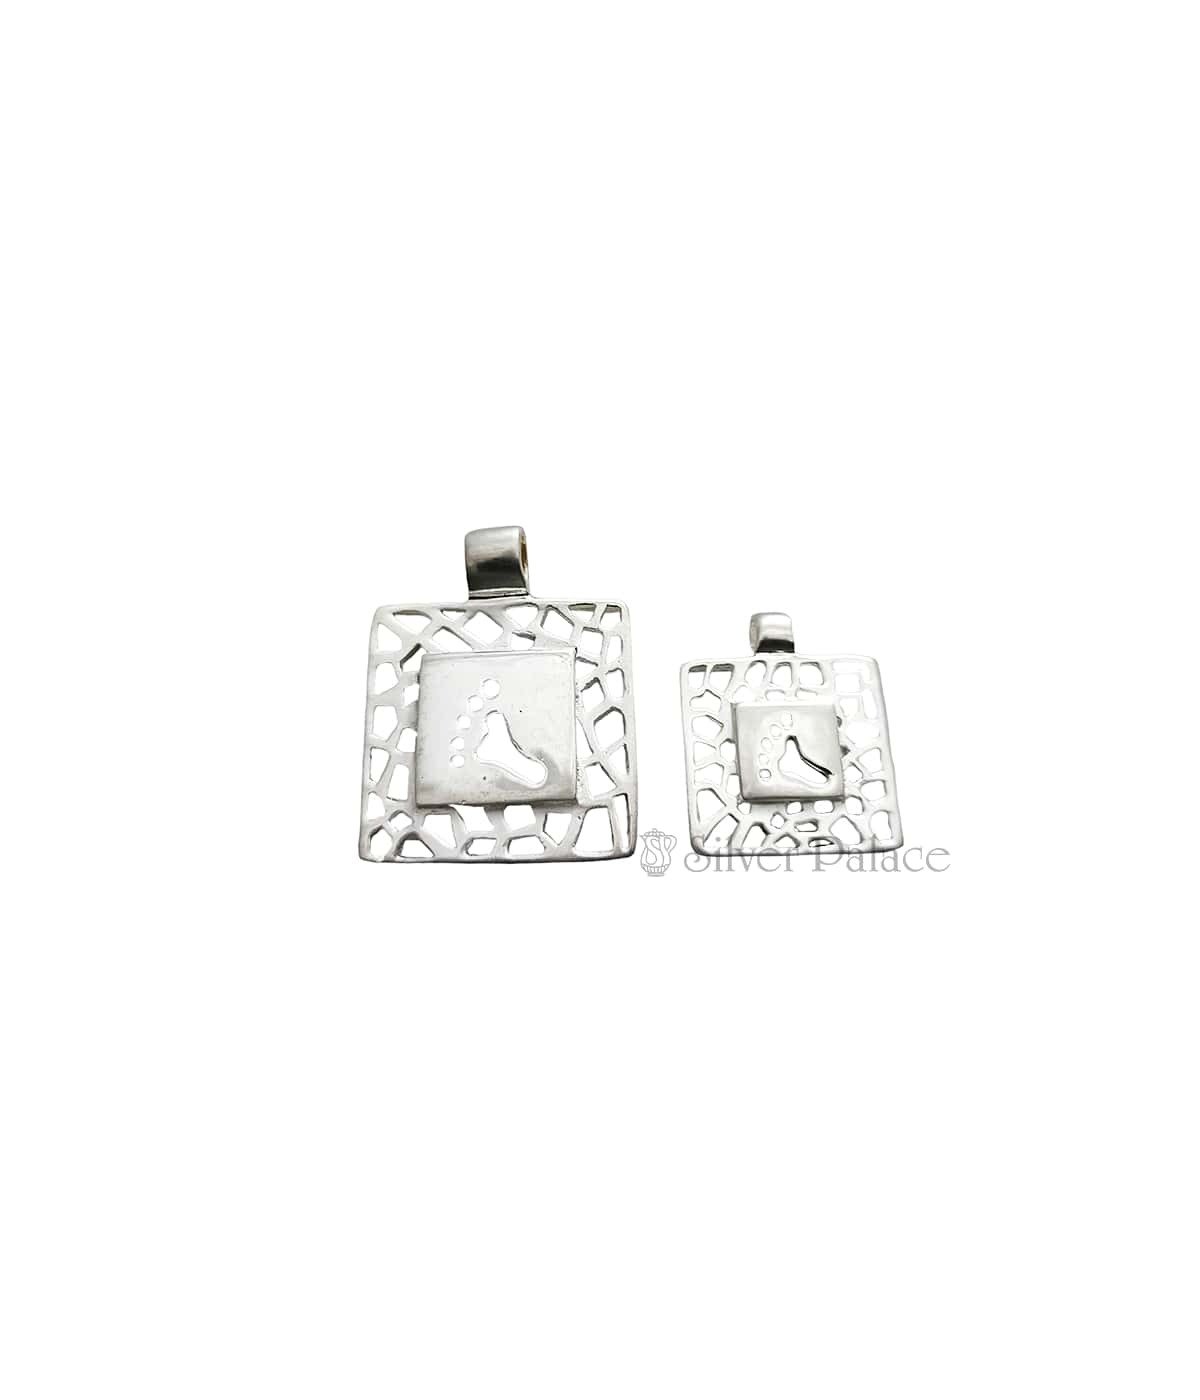 Sterling silver Square shaped Foot design pendant